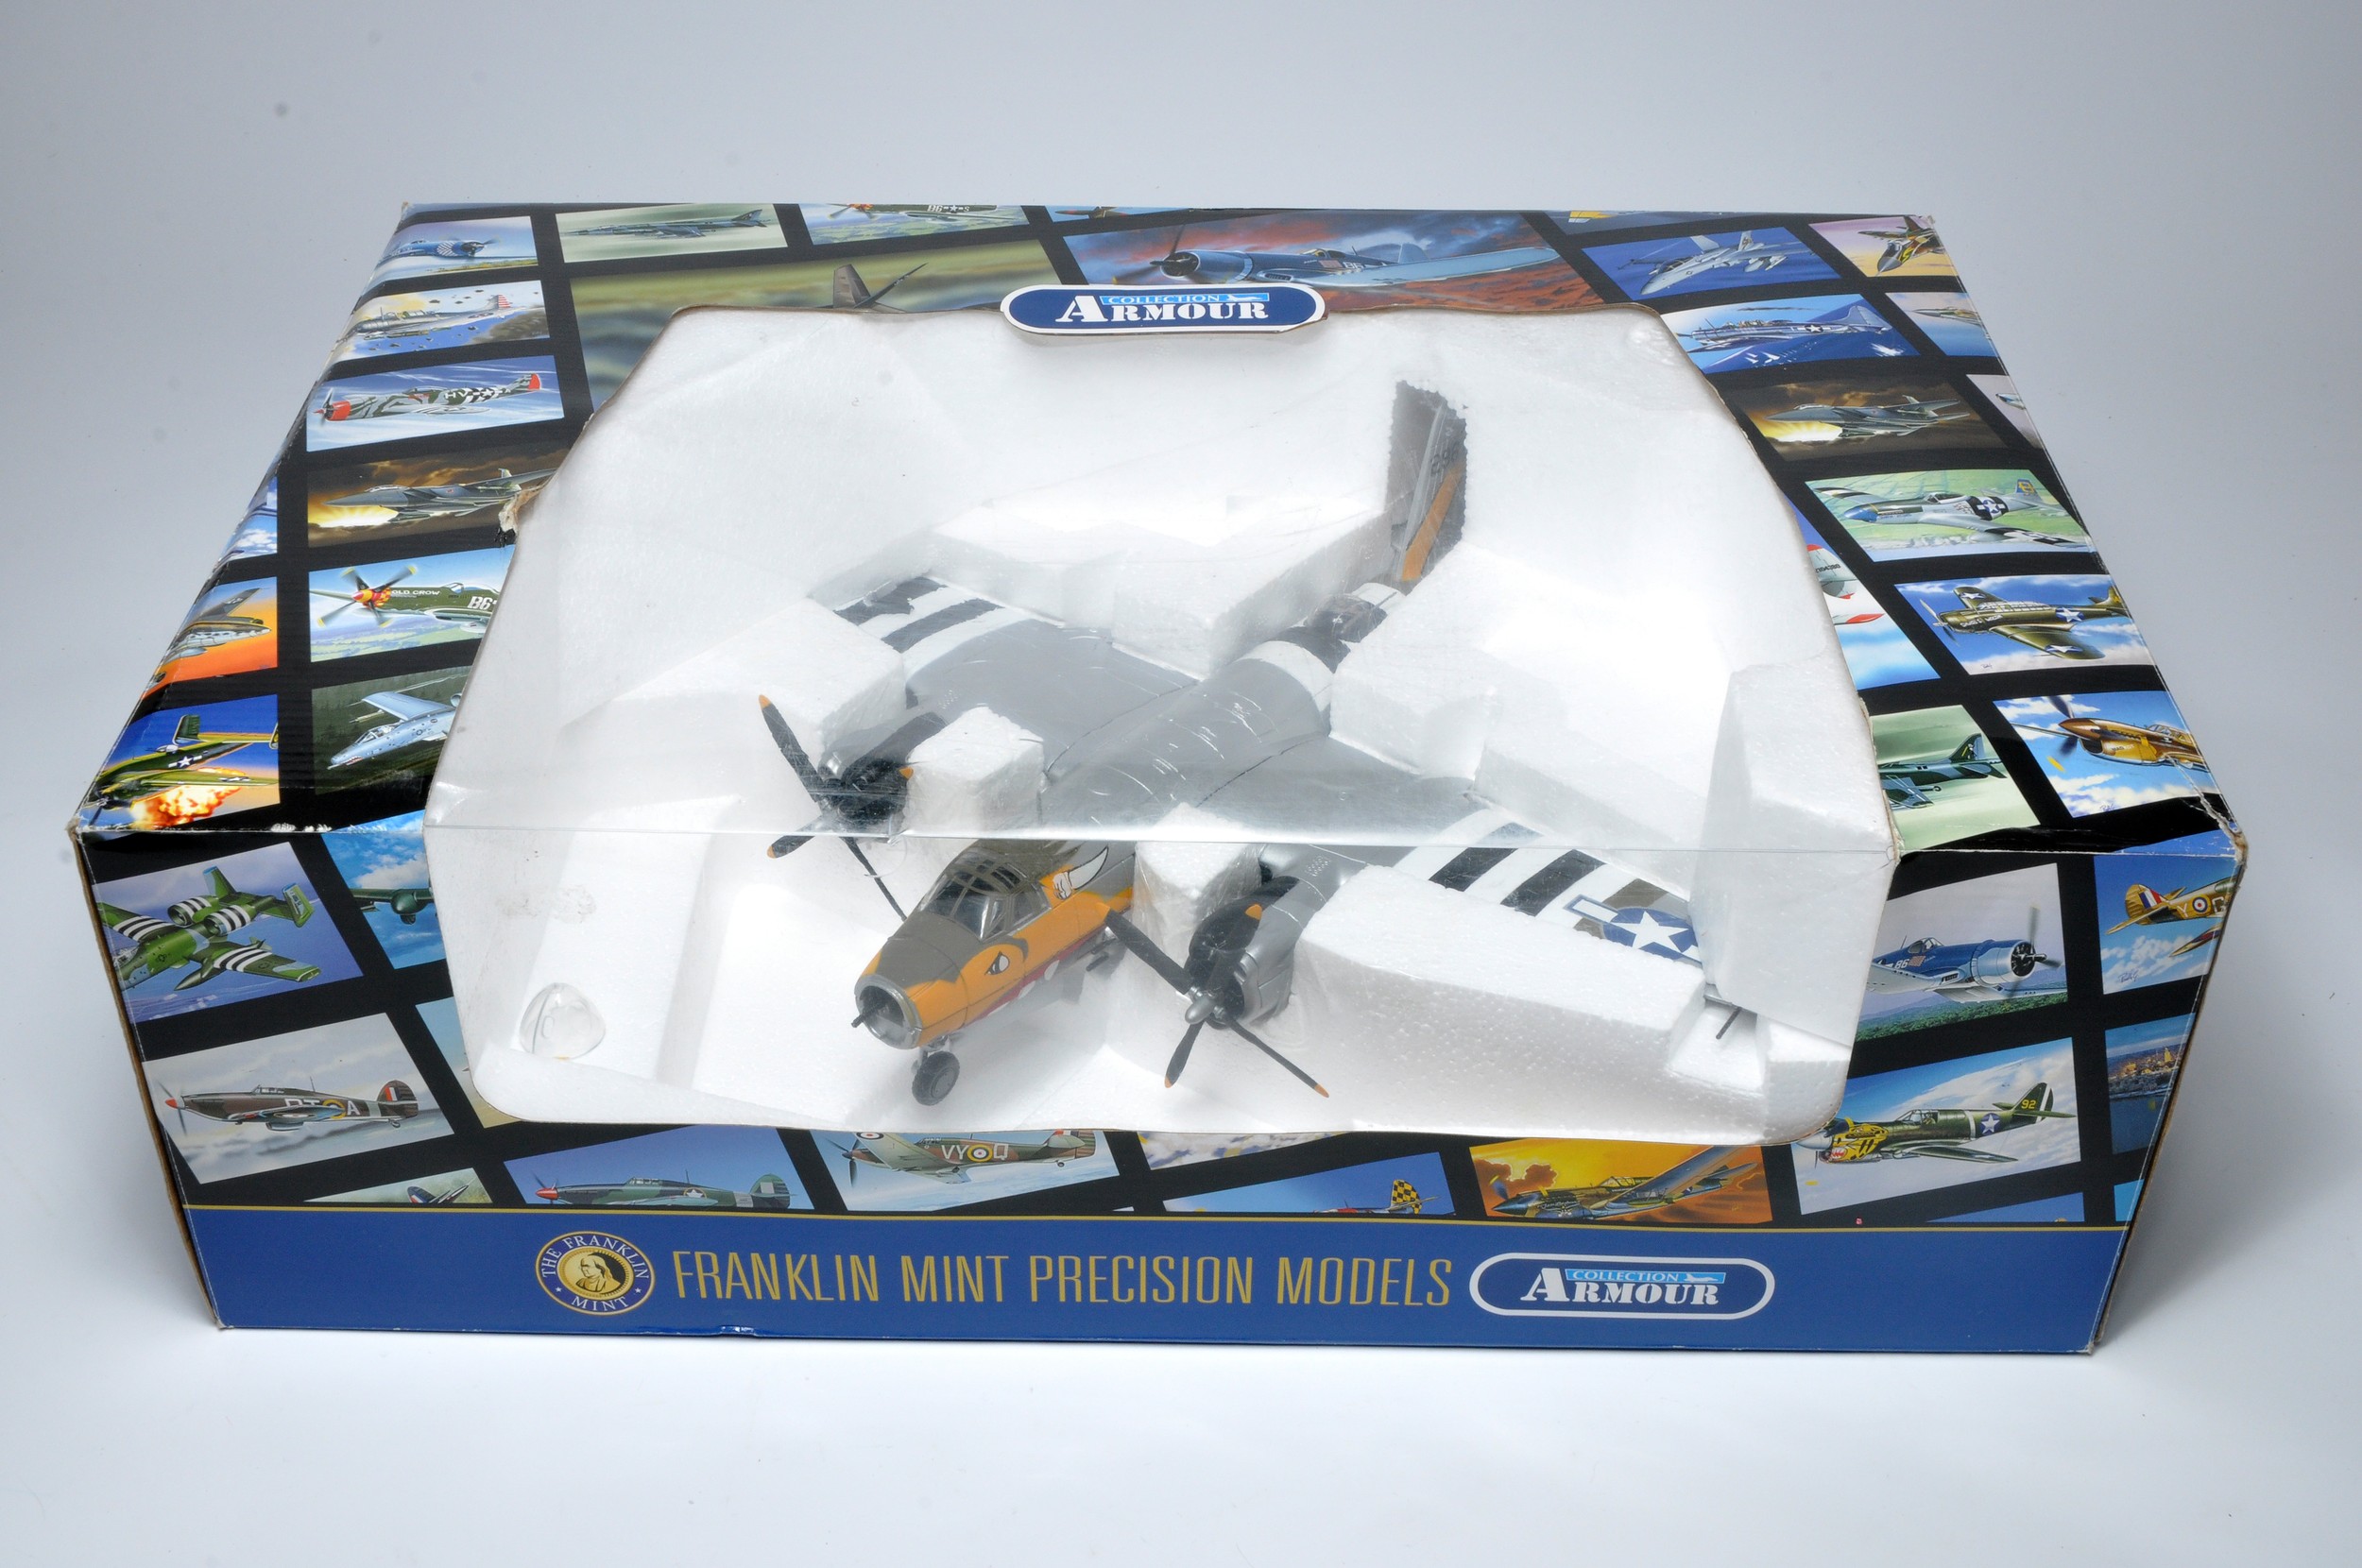 Franklin Mint 1/48 diecast model aircraft issue comprising No. B11E052 B26B. Looks to be generally